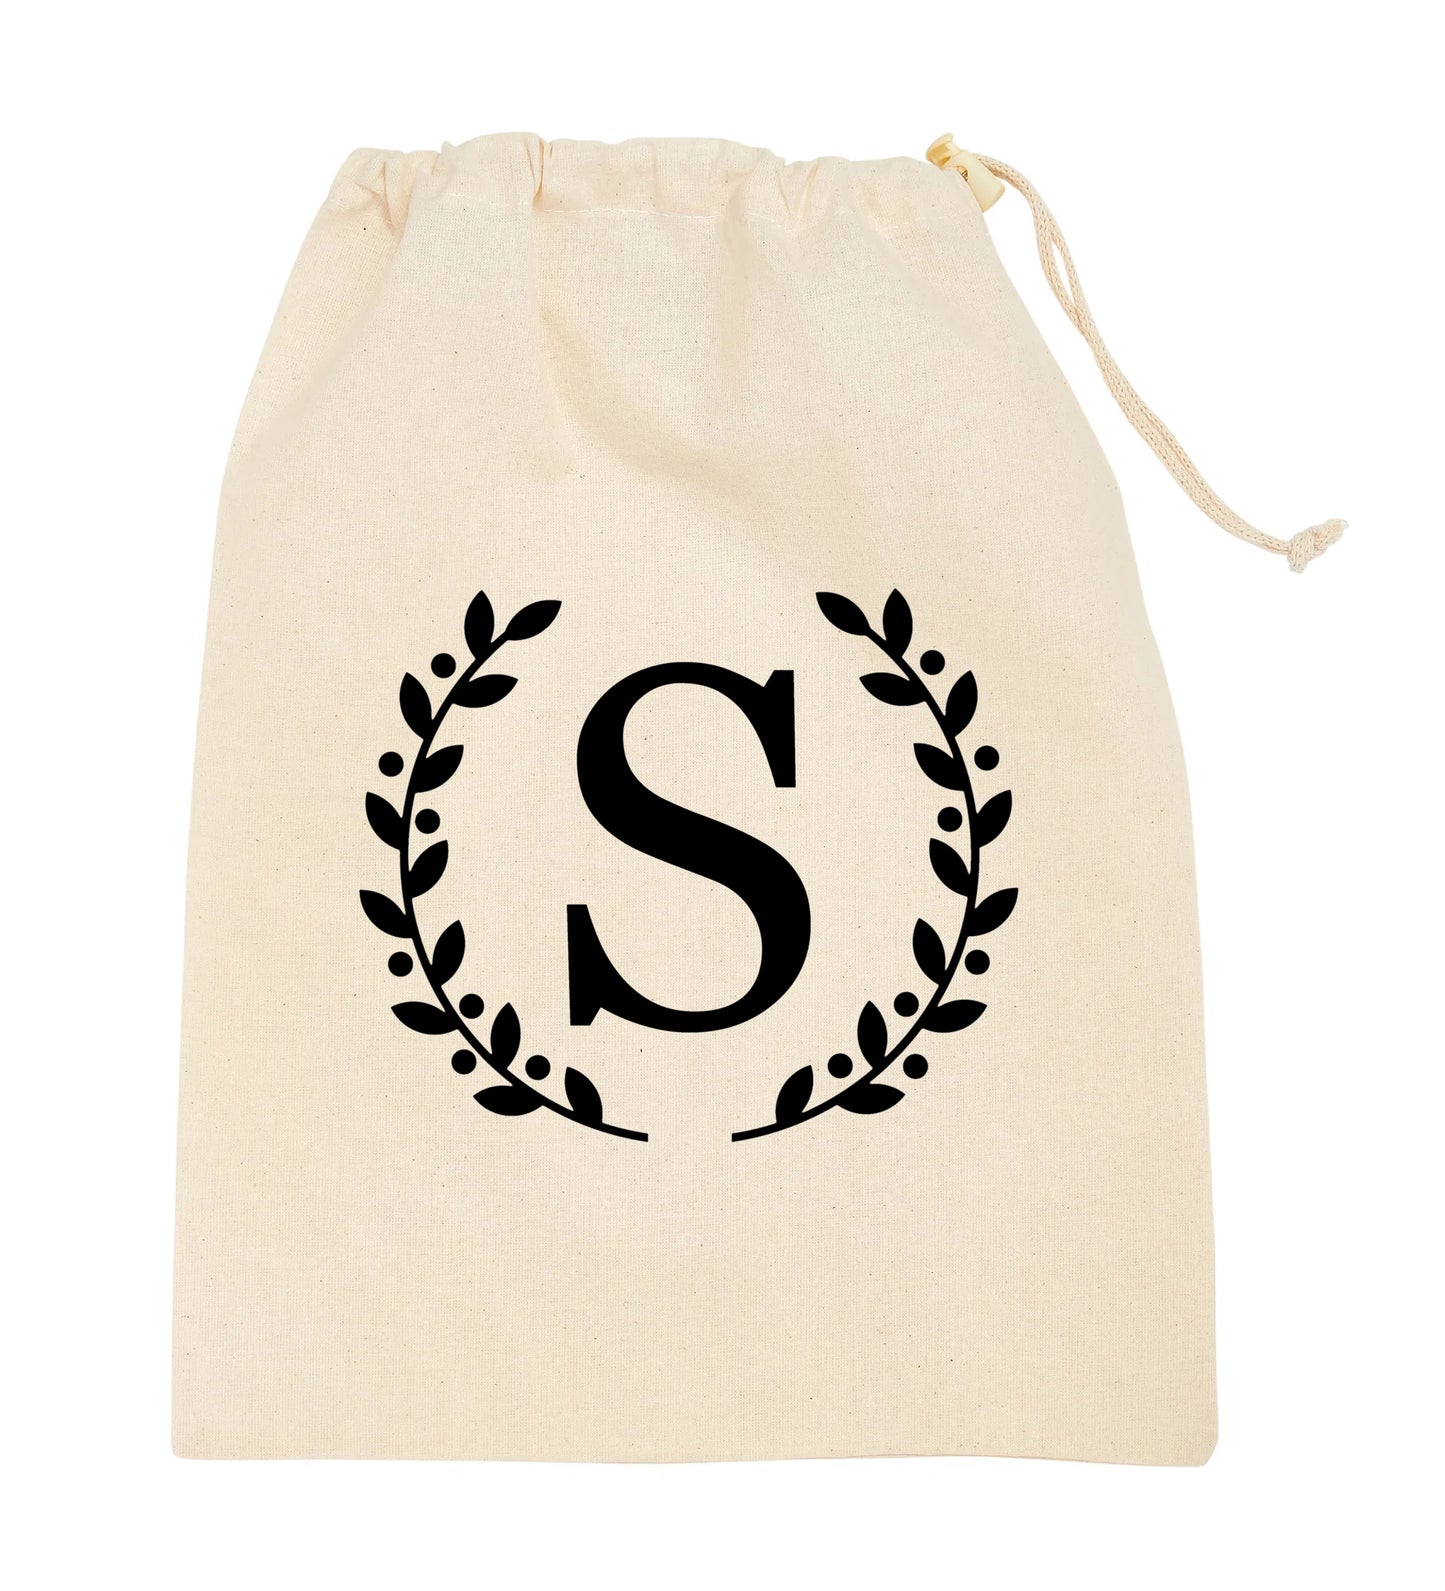 Custom Cotton Shoes Bags, Personalized Drawstring Pouch Bag, Customize Promotional Gift for Women, Men, One Color Print, Logo, Text, Name